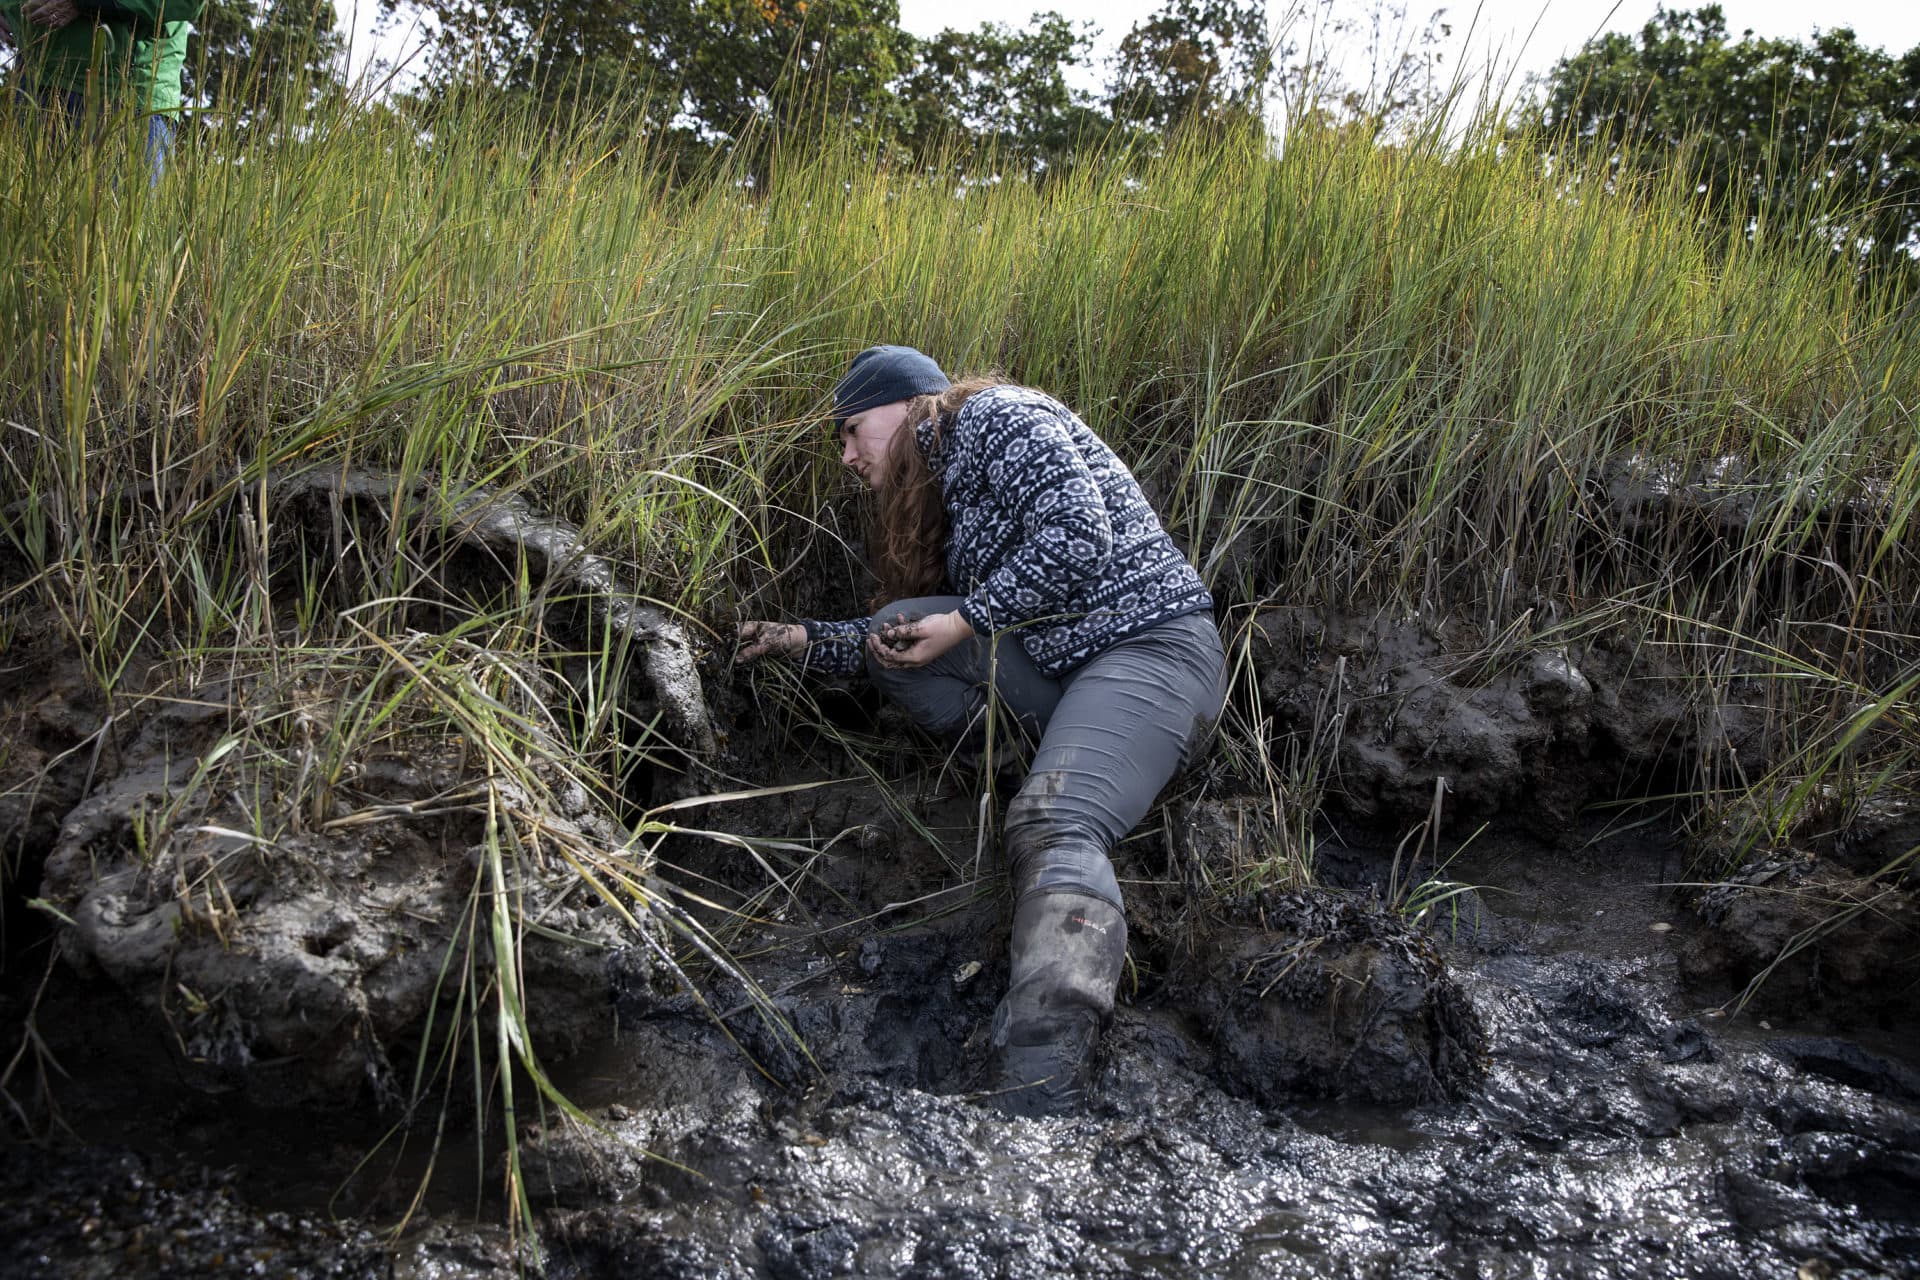 Coastal Restoration Ecologist Annalee Tweitmann searches a healthy section of marsh at Rough Meadows Wildlife Sanctuary in Rowley, for ribbed mussels to transplant into the degraded marsh at Joppa Flats. (Robin Lubbock/WBUR)